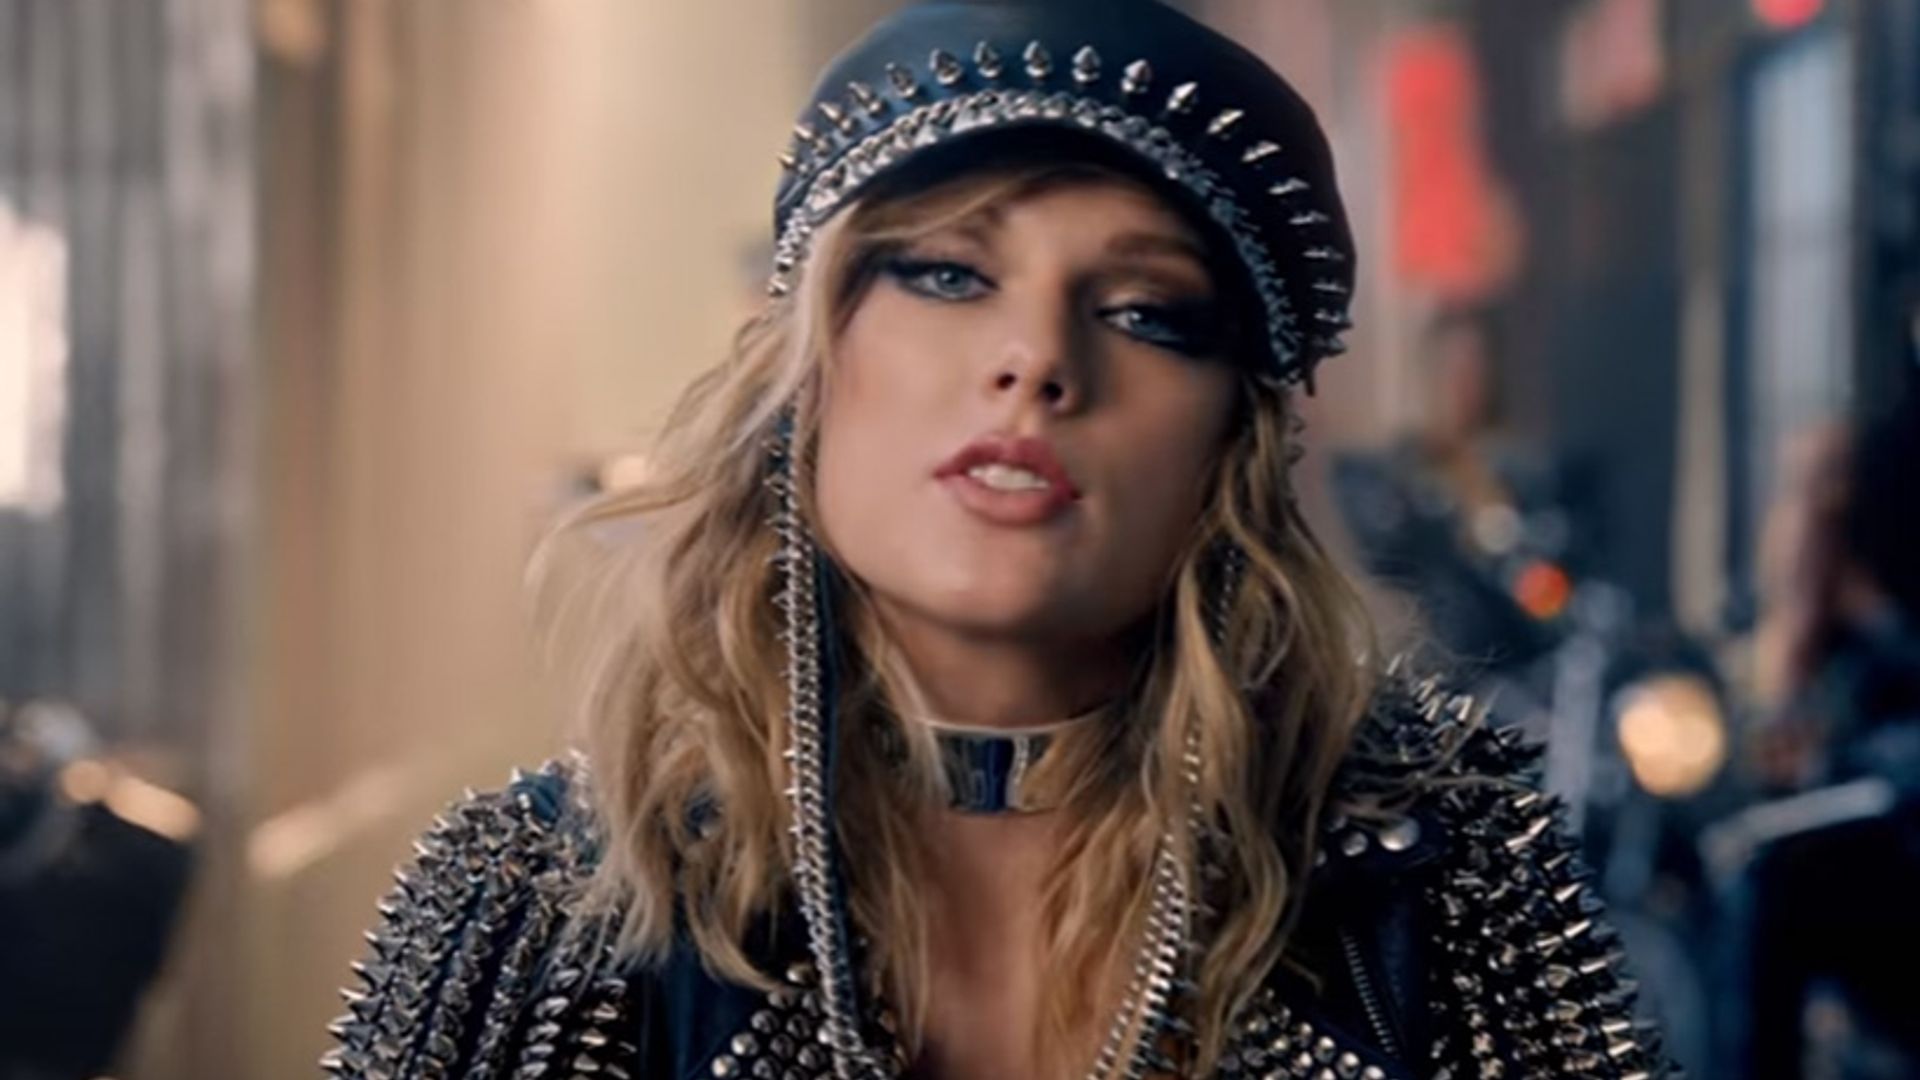 All of the hidden messages from Taylor Swift's new music video